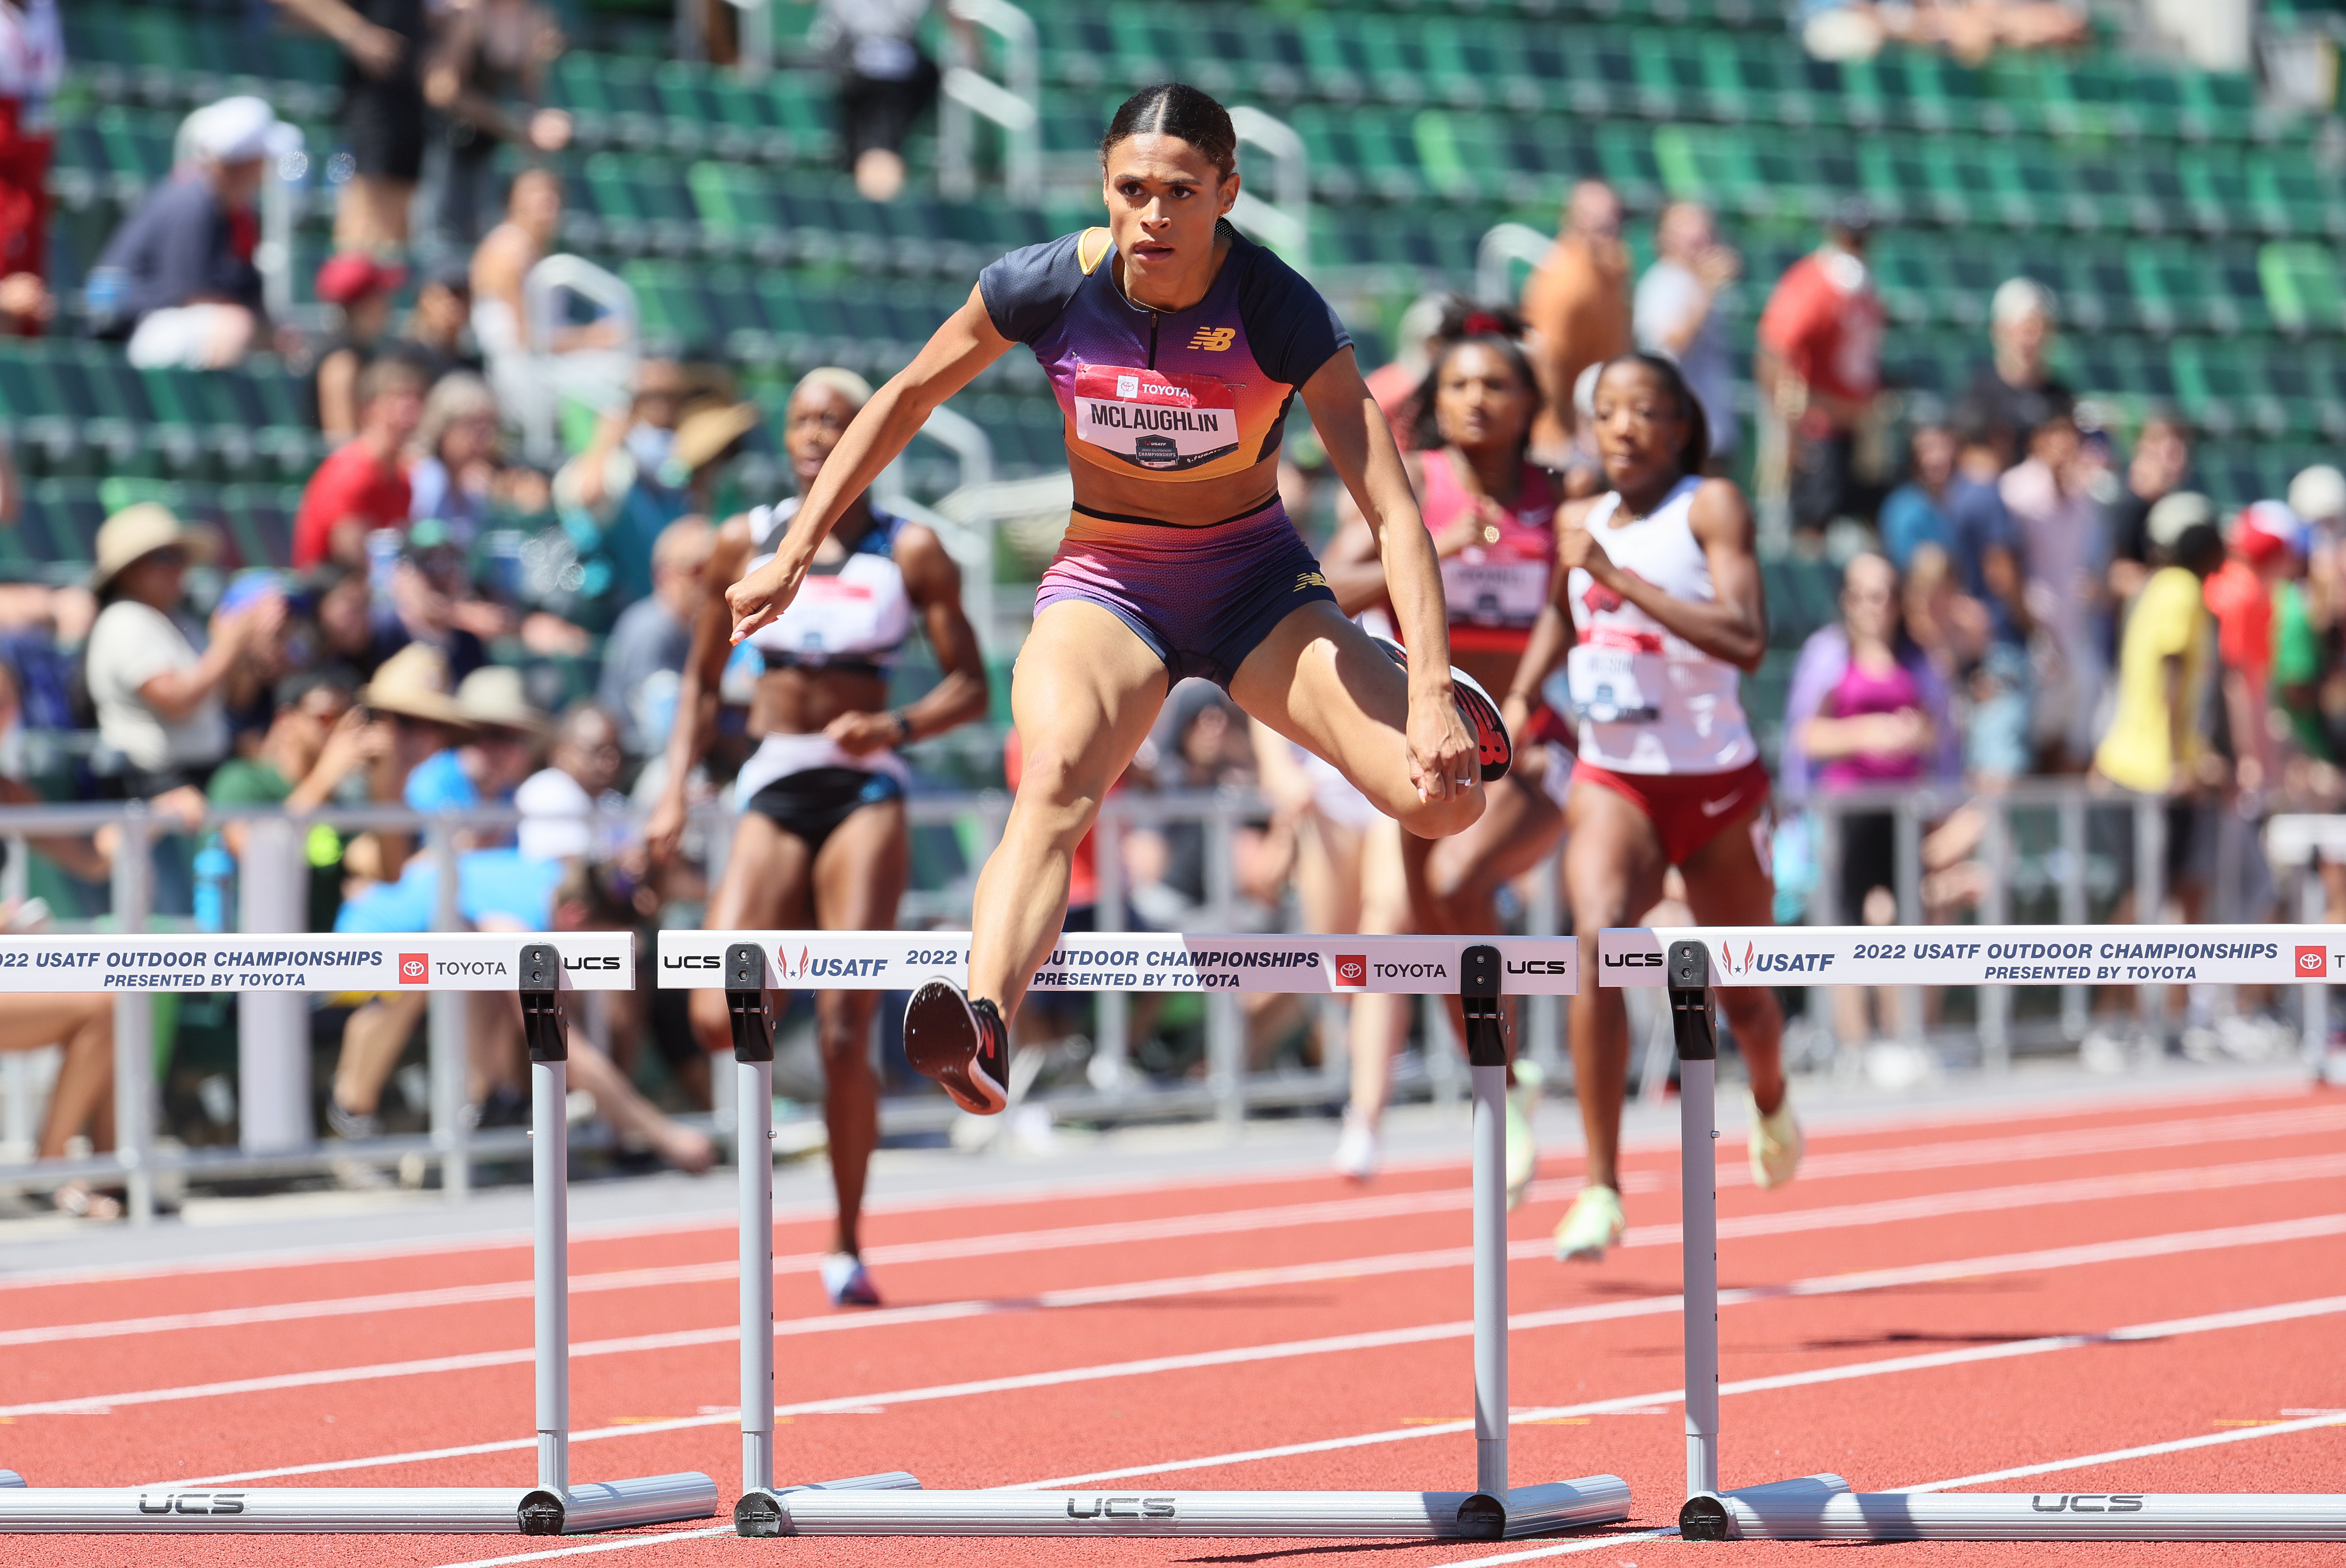 Sydney McLaughlin sets a world record in the final of the Women 400 Meter Hurdles during the 2022 USATF Outdoor Championships at Hayward Field on June 25, 2022 in Eugene, Oregon.